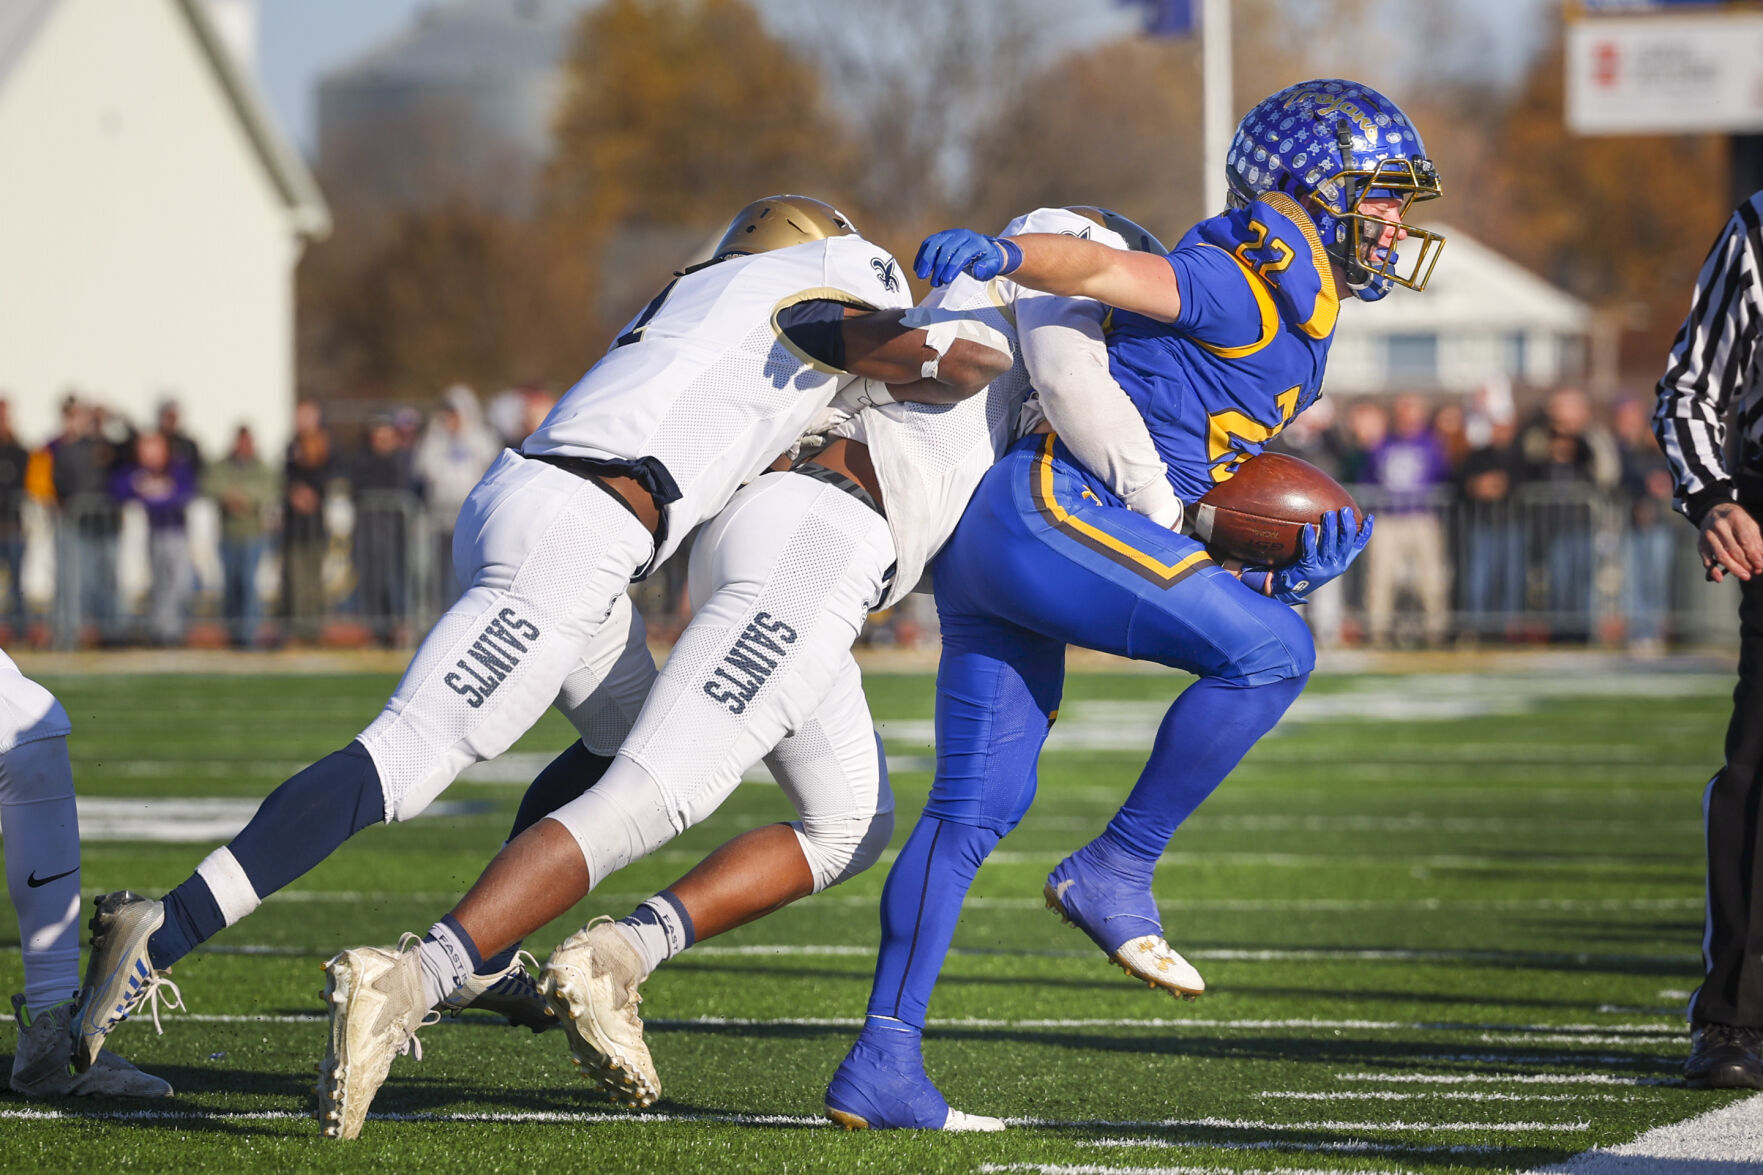 Maroa-Forsyth Wins Class 2A Quarterfinals with 35-11 Victory